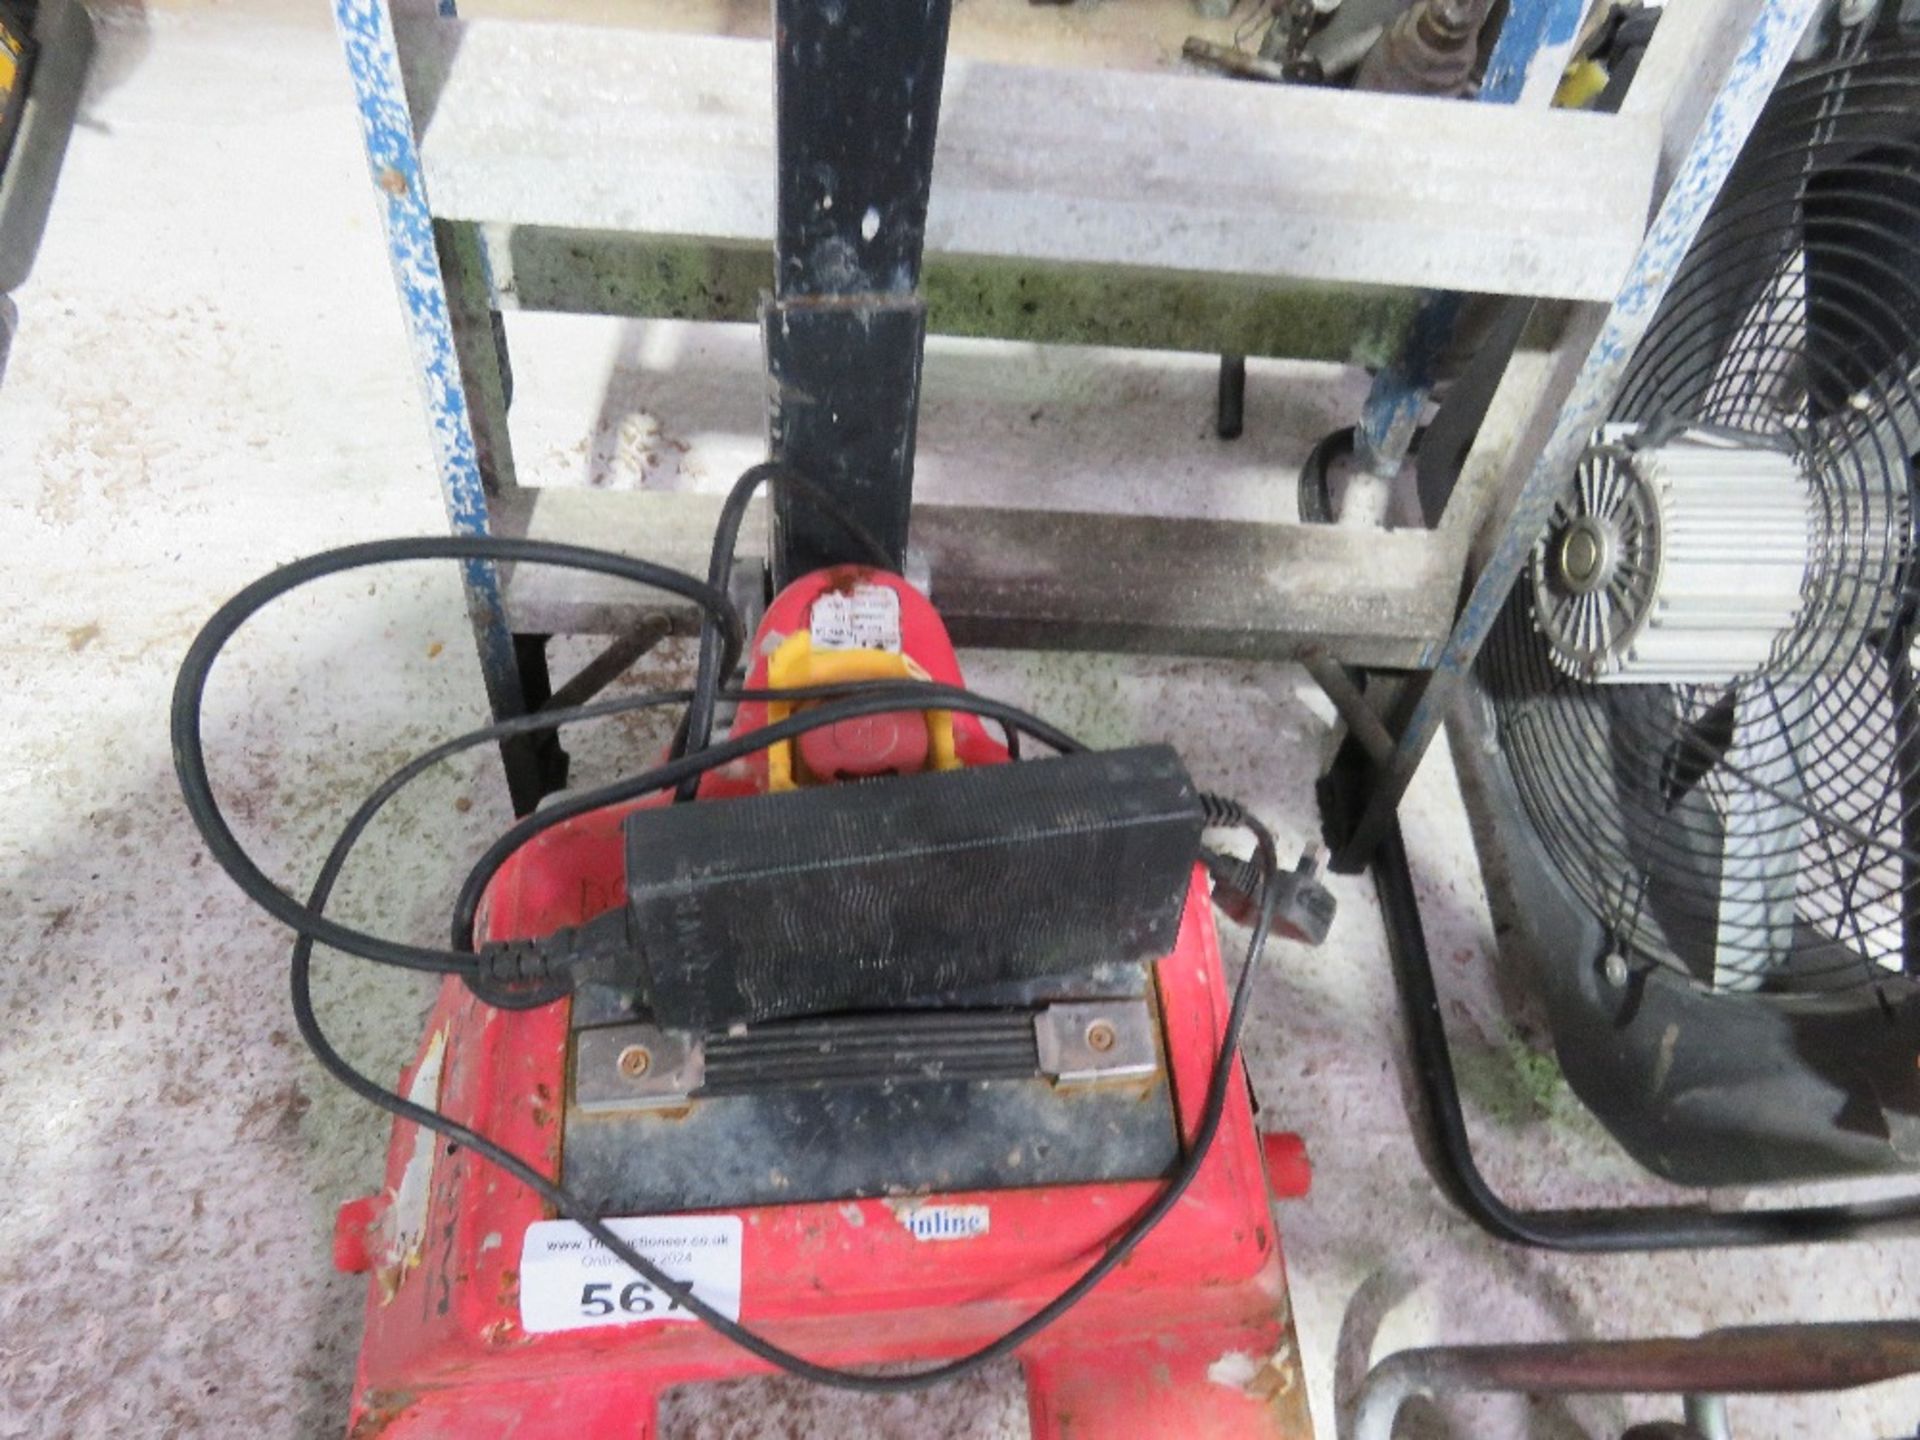 BATTERY POWERED PALLET TRUCK. WHEN TESTED WAS SEEN TO LIFT, LOWER AND DRIVE. WITH A CHARGER. - Image 4 of 6